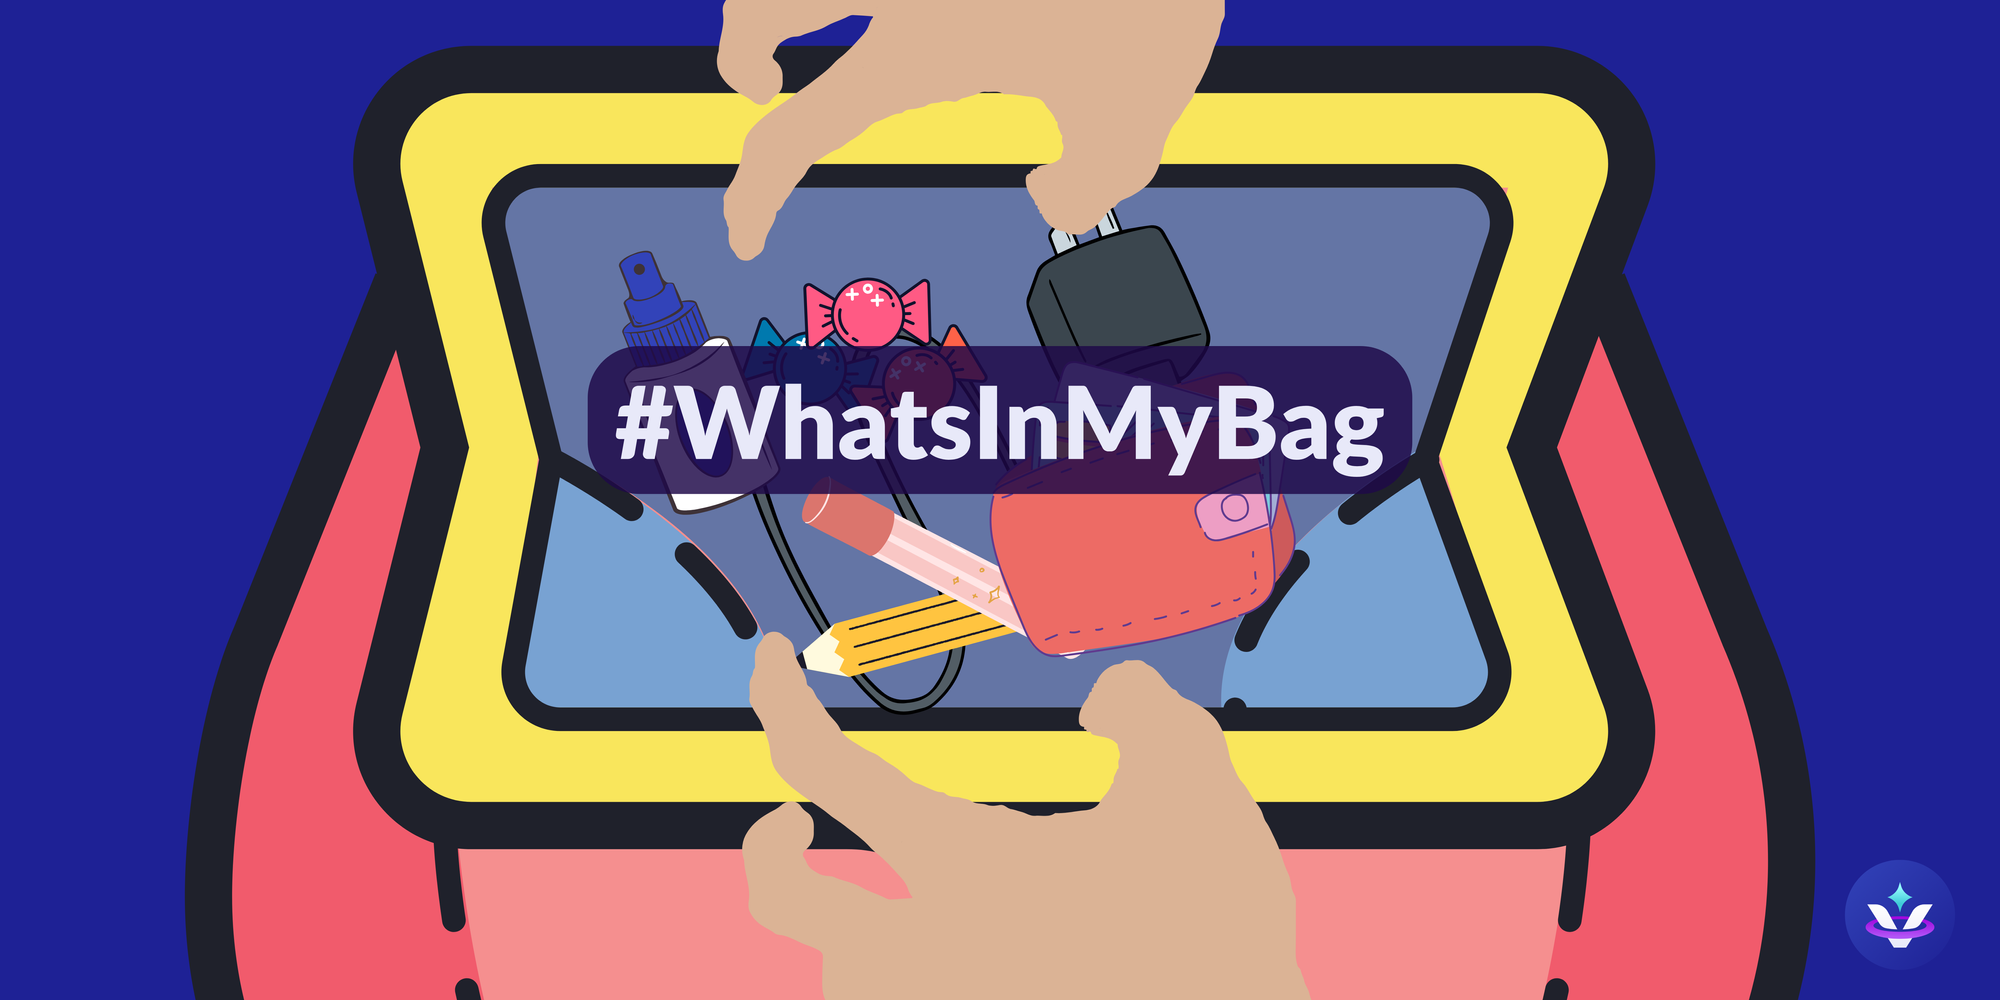 Image of two hands opening a red bag. Inside is various different items. The event hashtag #WhatsInMyBag is on the image.  